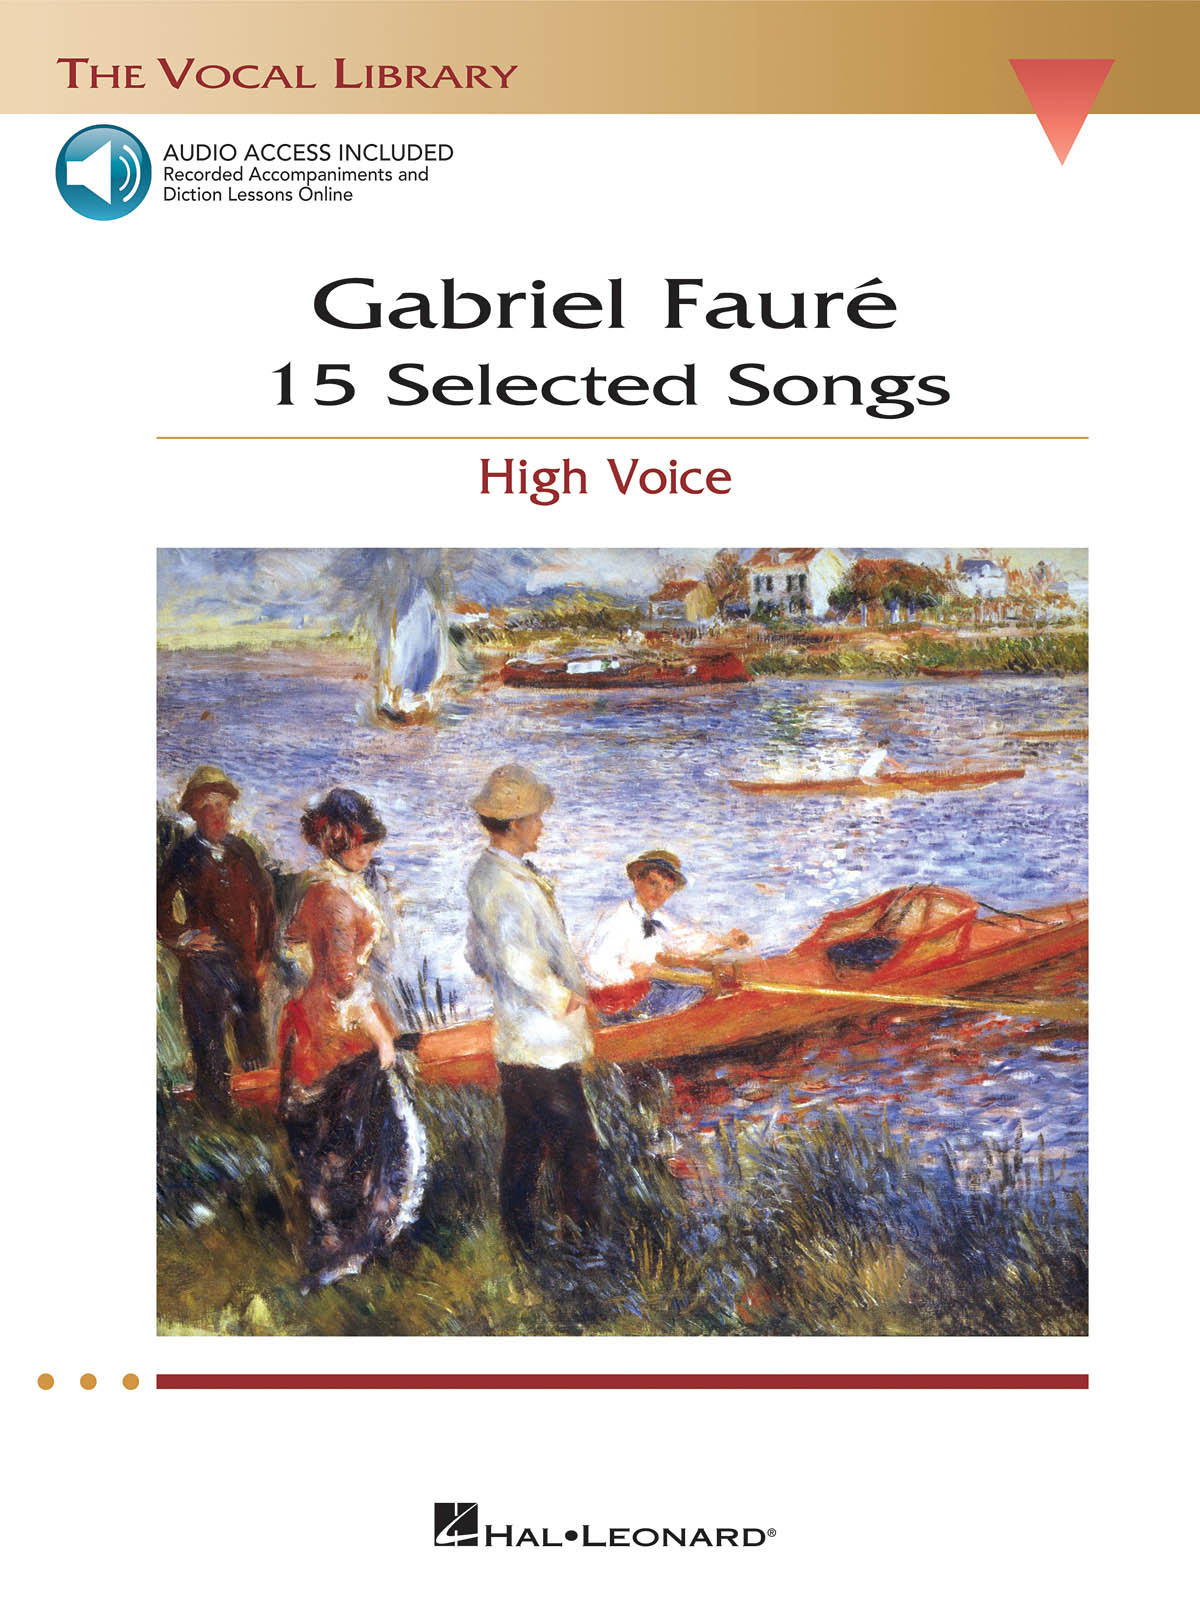 Gabriel Fauré: 15 Selected Songs - High Voice: Vocal and Piano: Vocal Album